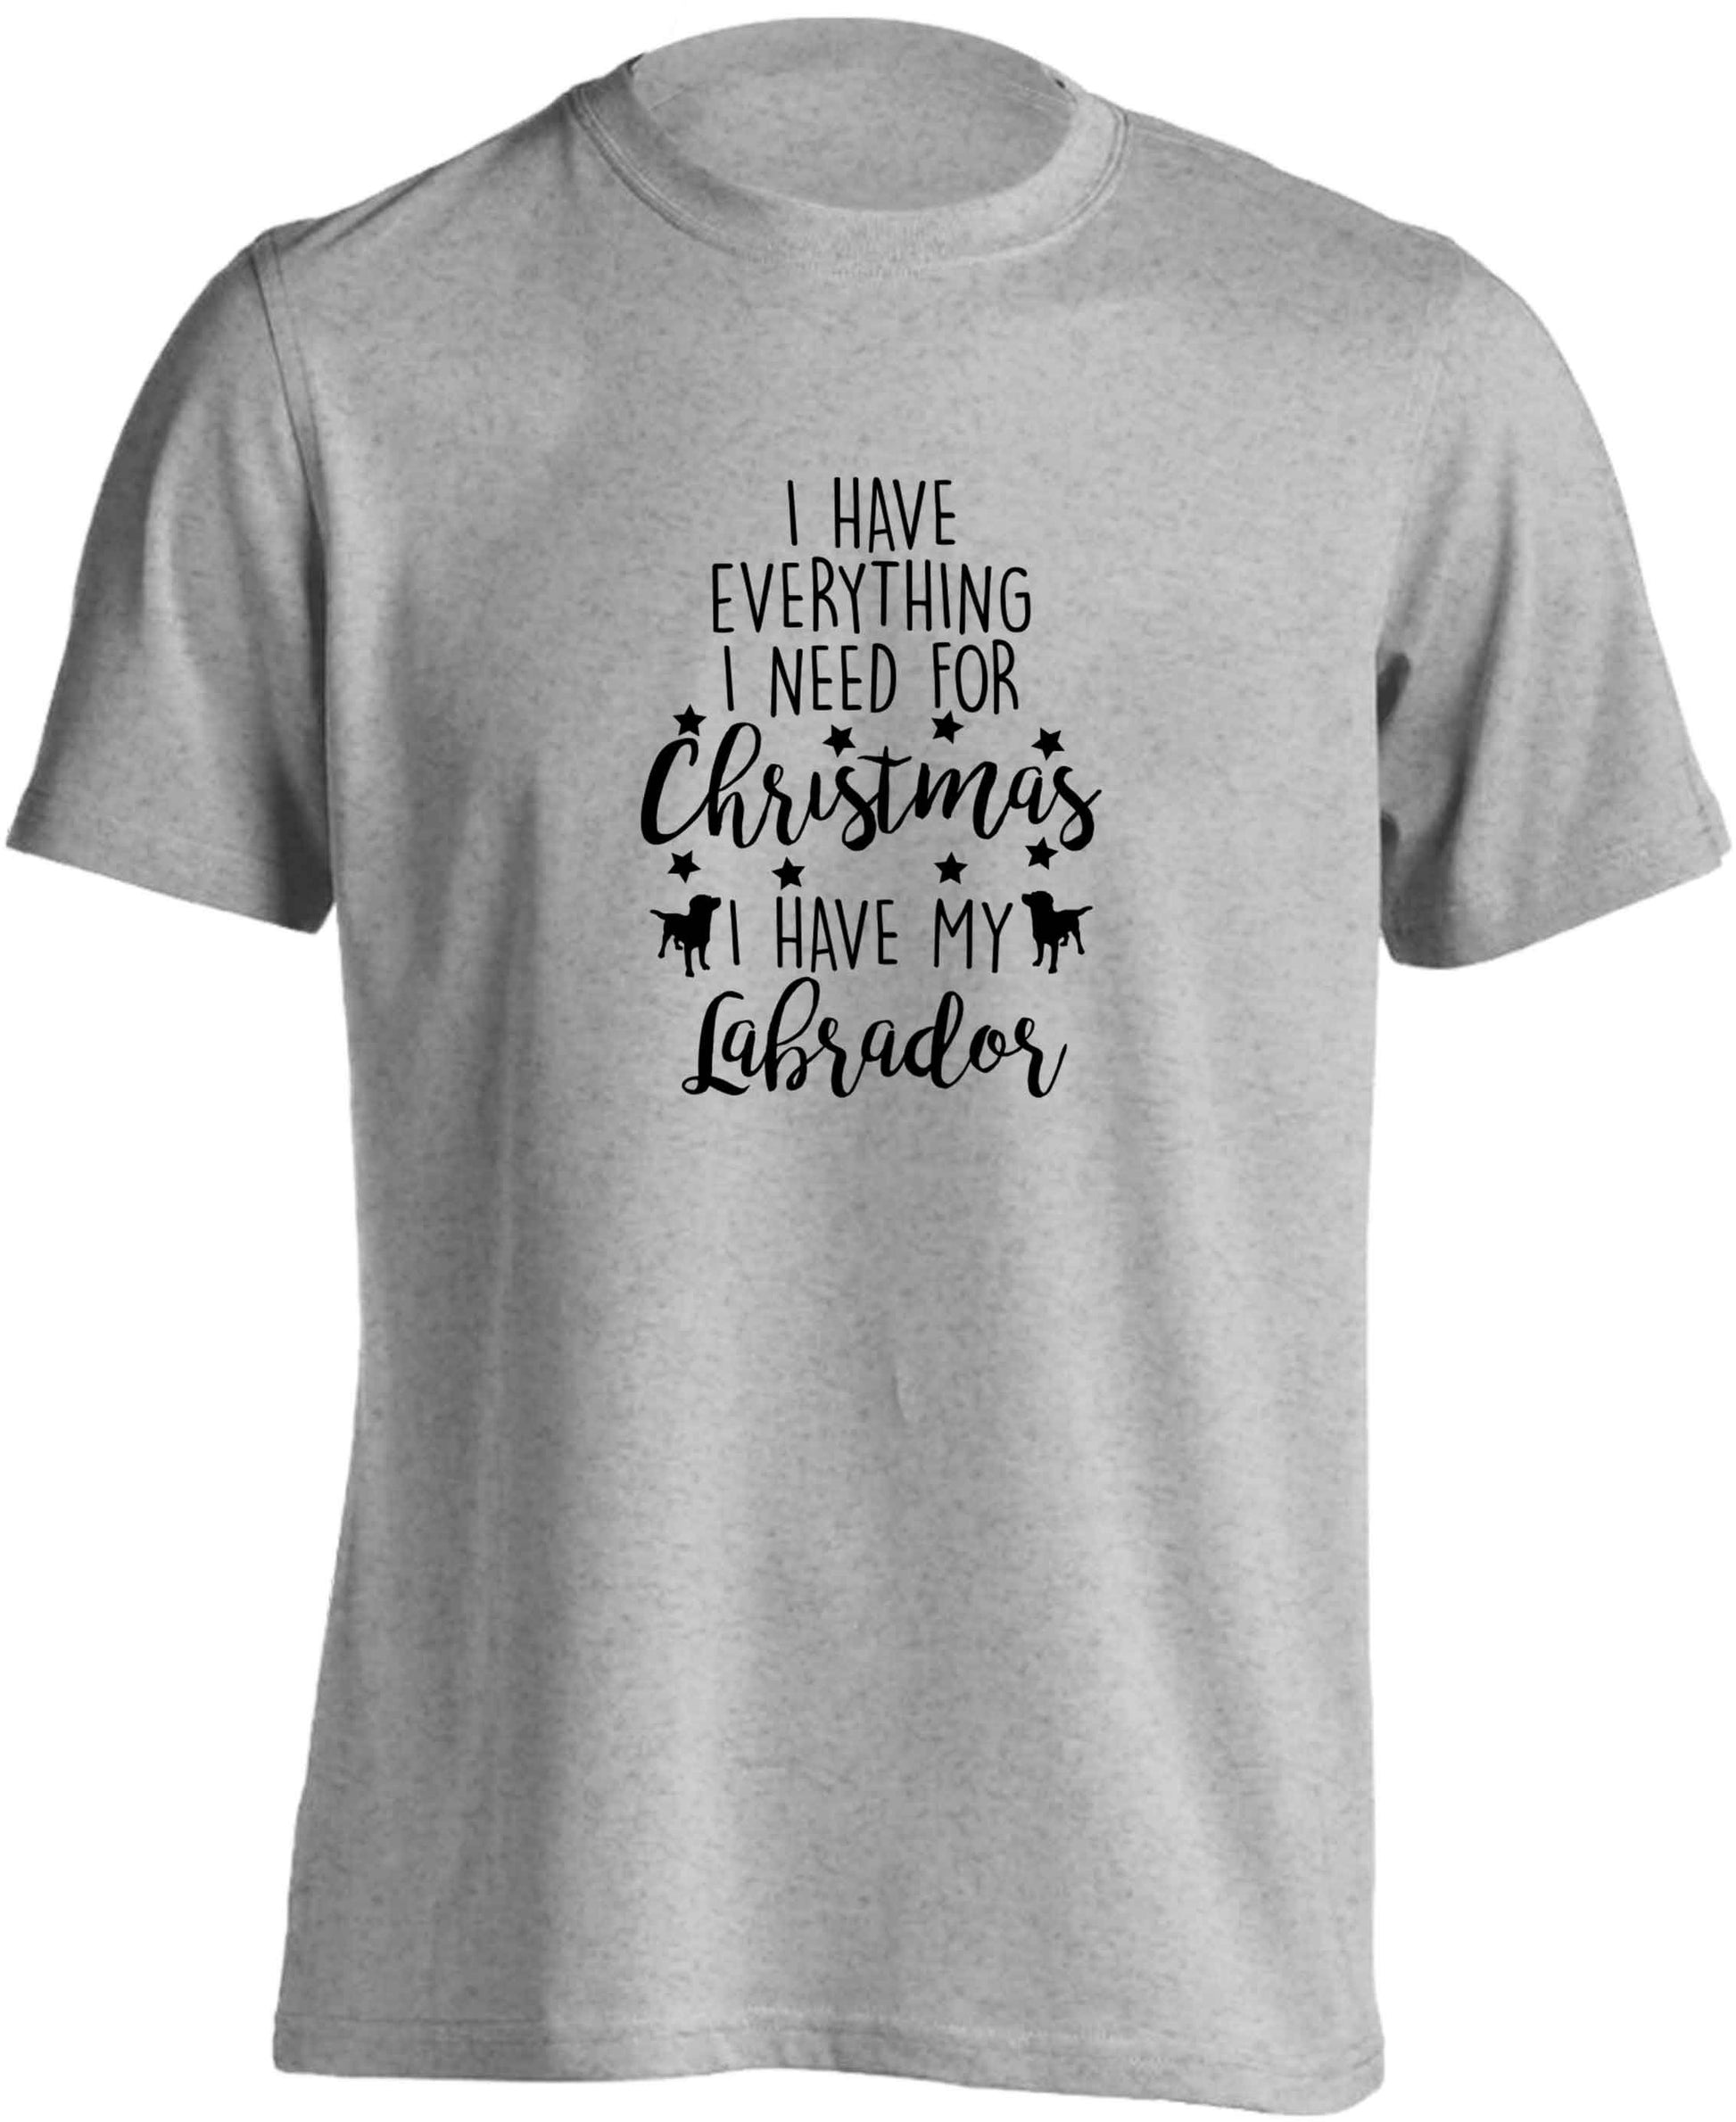 I have everything I need for Christmas I have my labrador adults unisex grey Tshirt 2XL